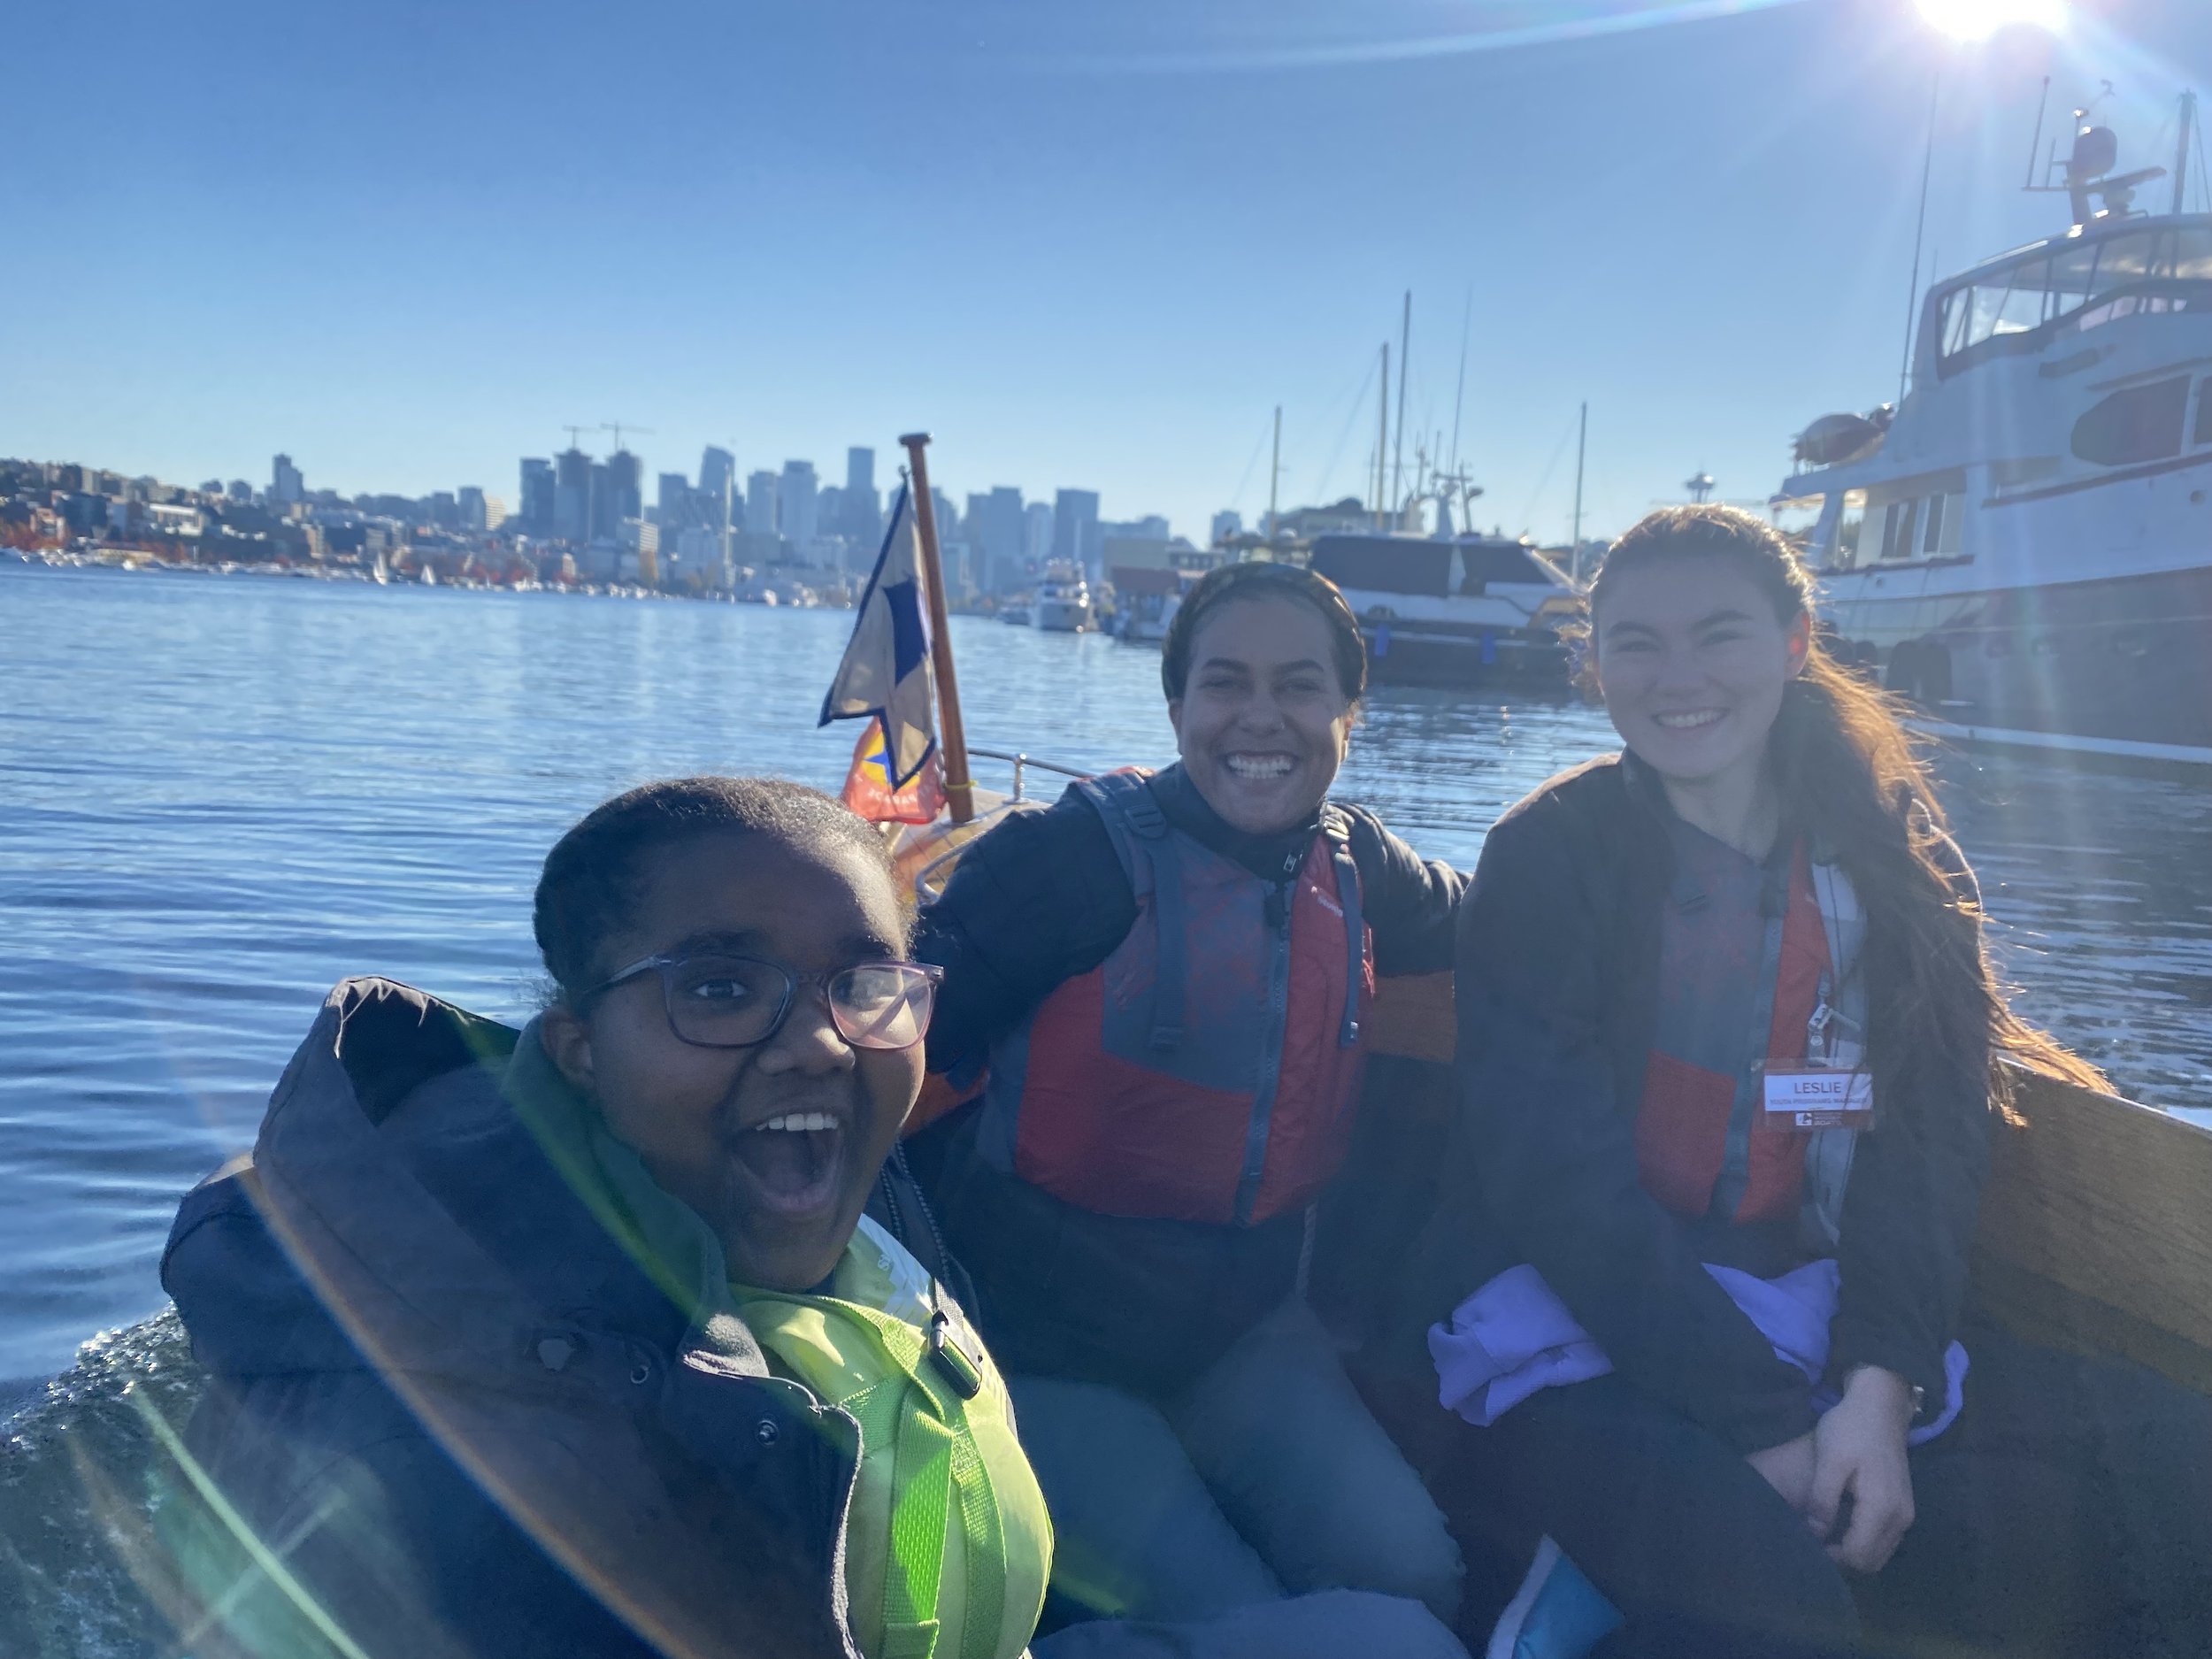 GIM Steamboat - Fall-Winter 2022 Get Into It: Maritime! cohort on a steamboat ride in Lake Union with The Center for Wooden Boats